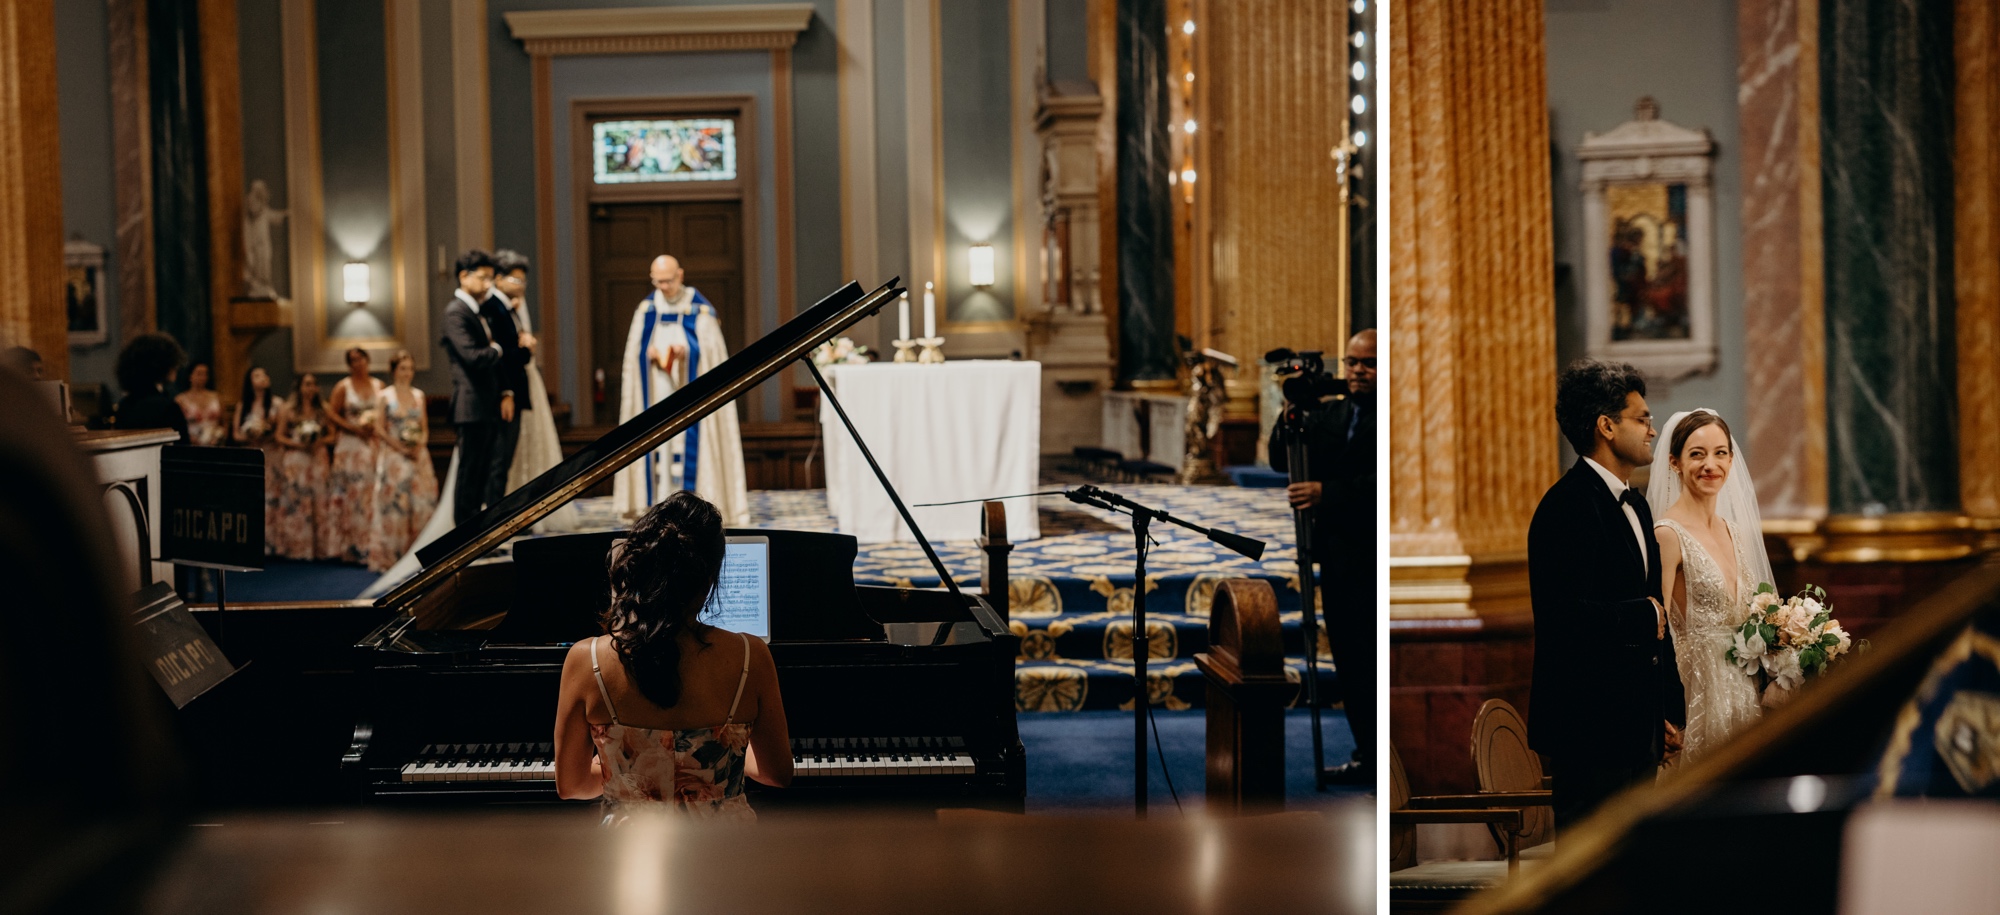 bridesmaid plays piano as bride and groom look on during their wedding ceremony in new york city